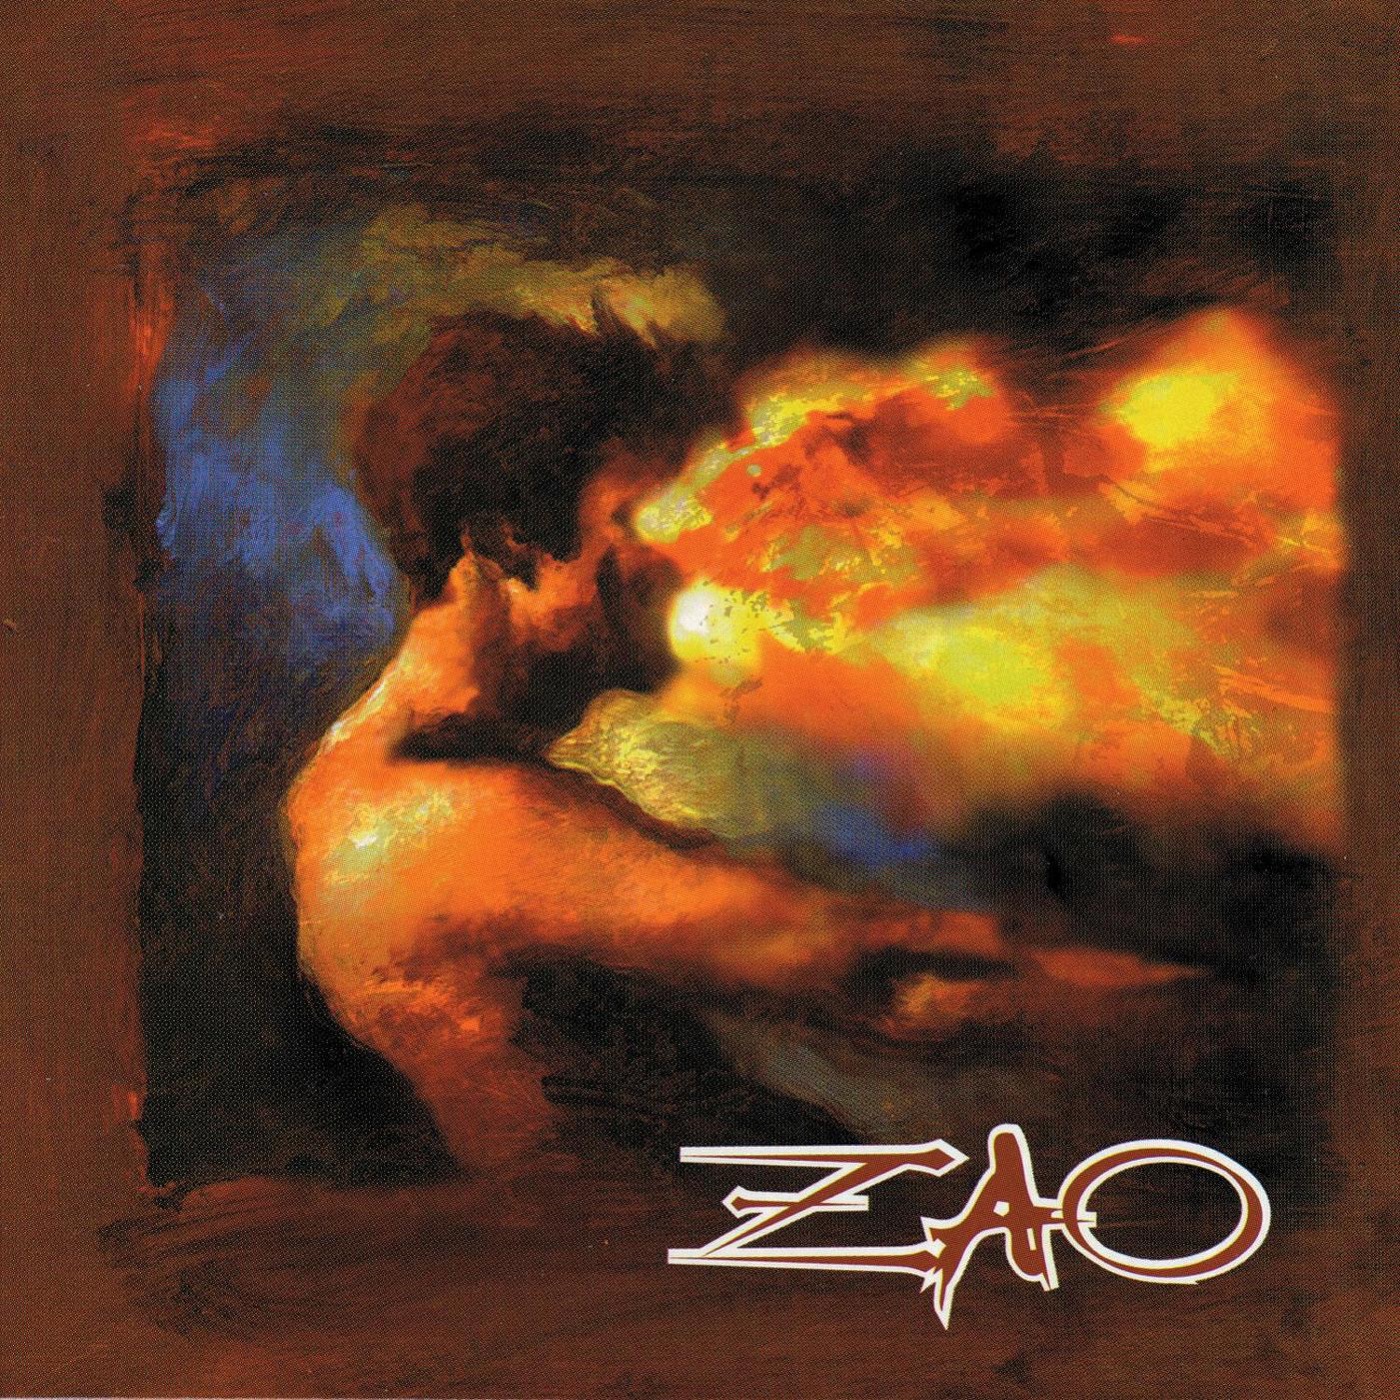 Where Blood and Fire Bring Rest by Zao